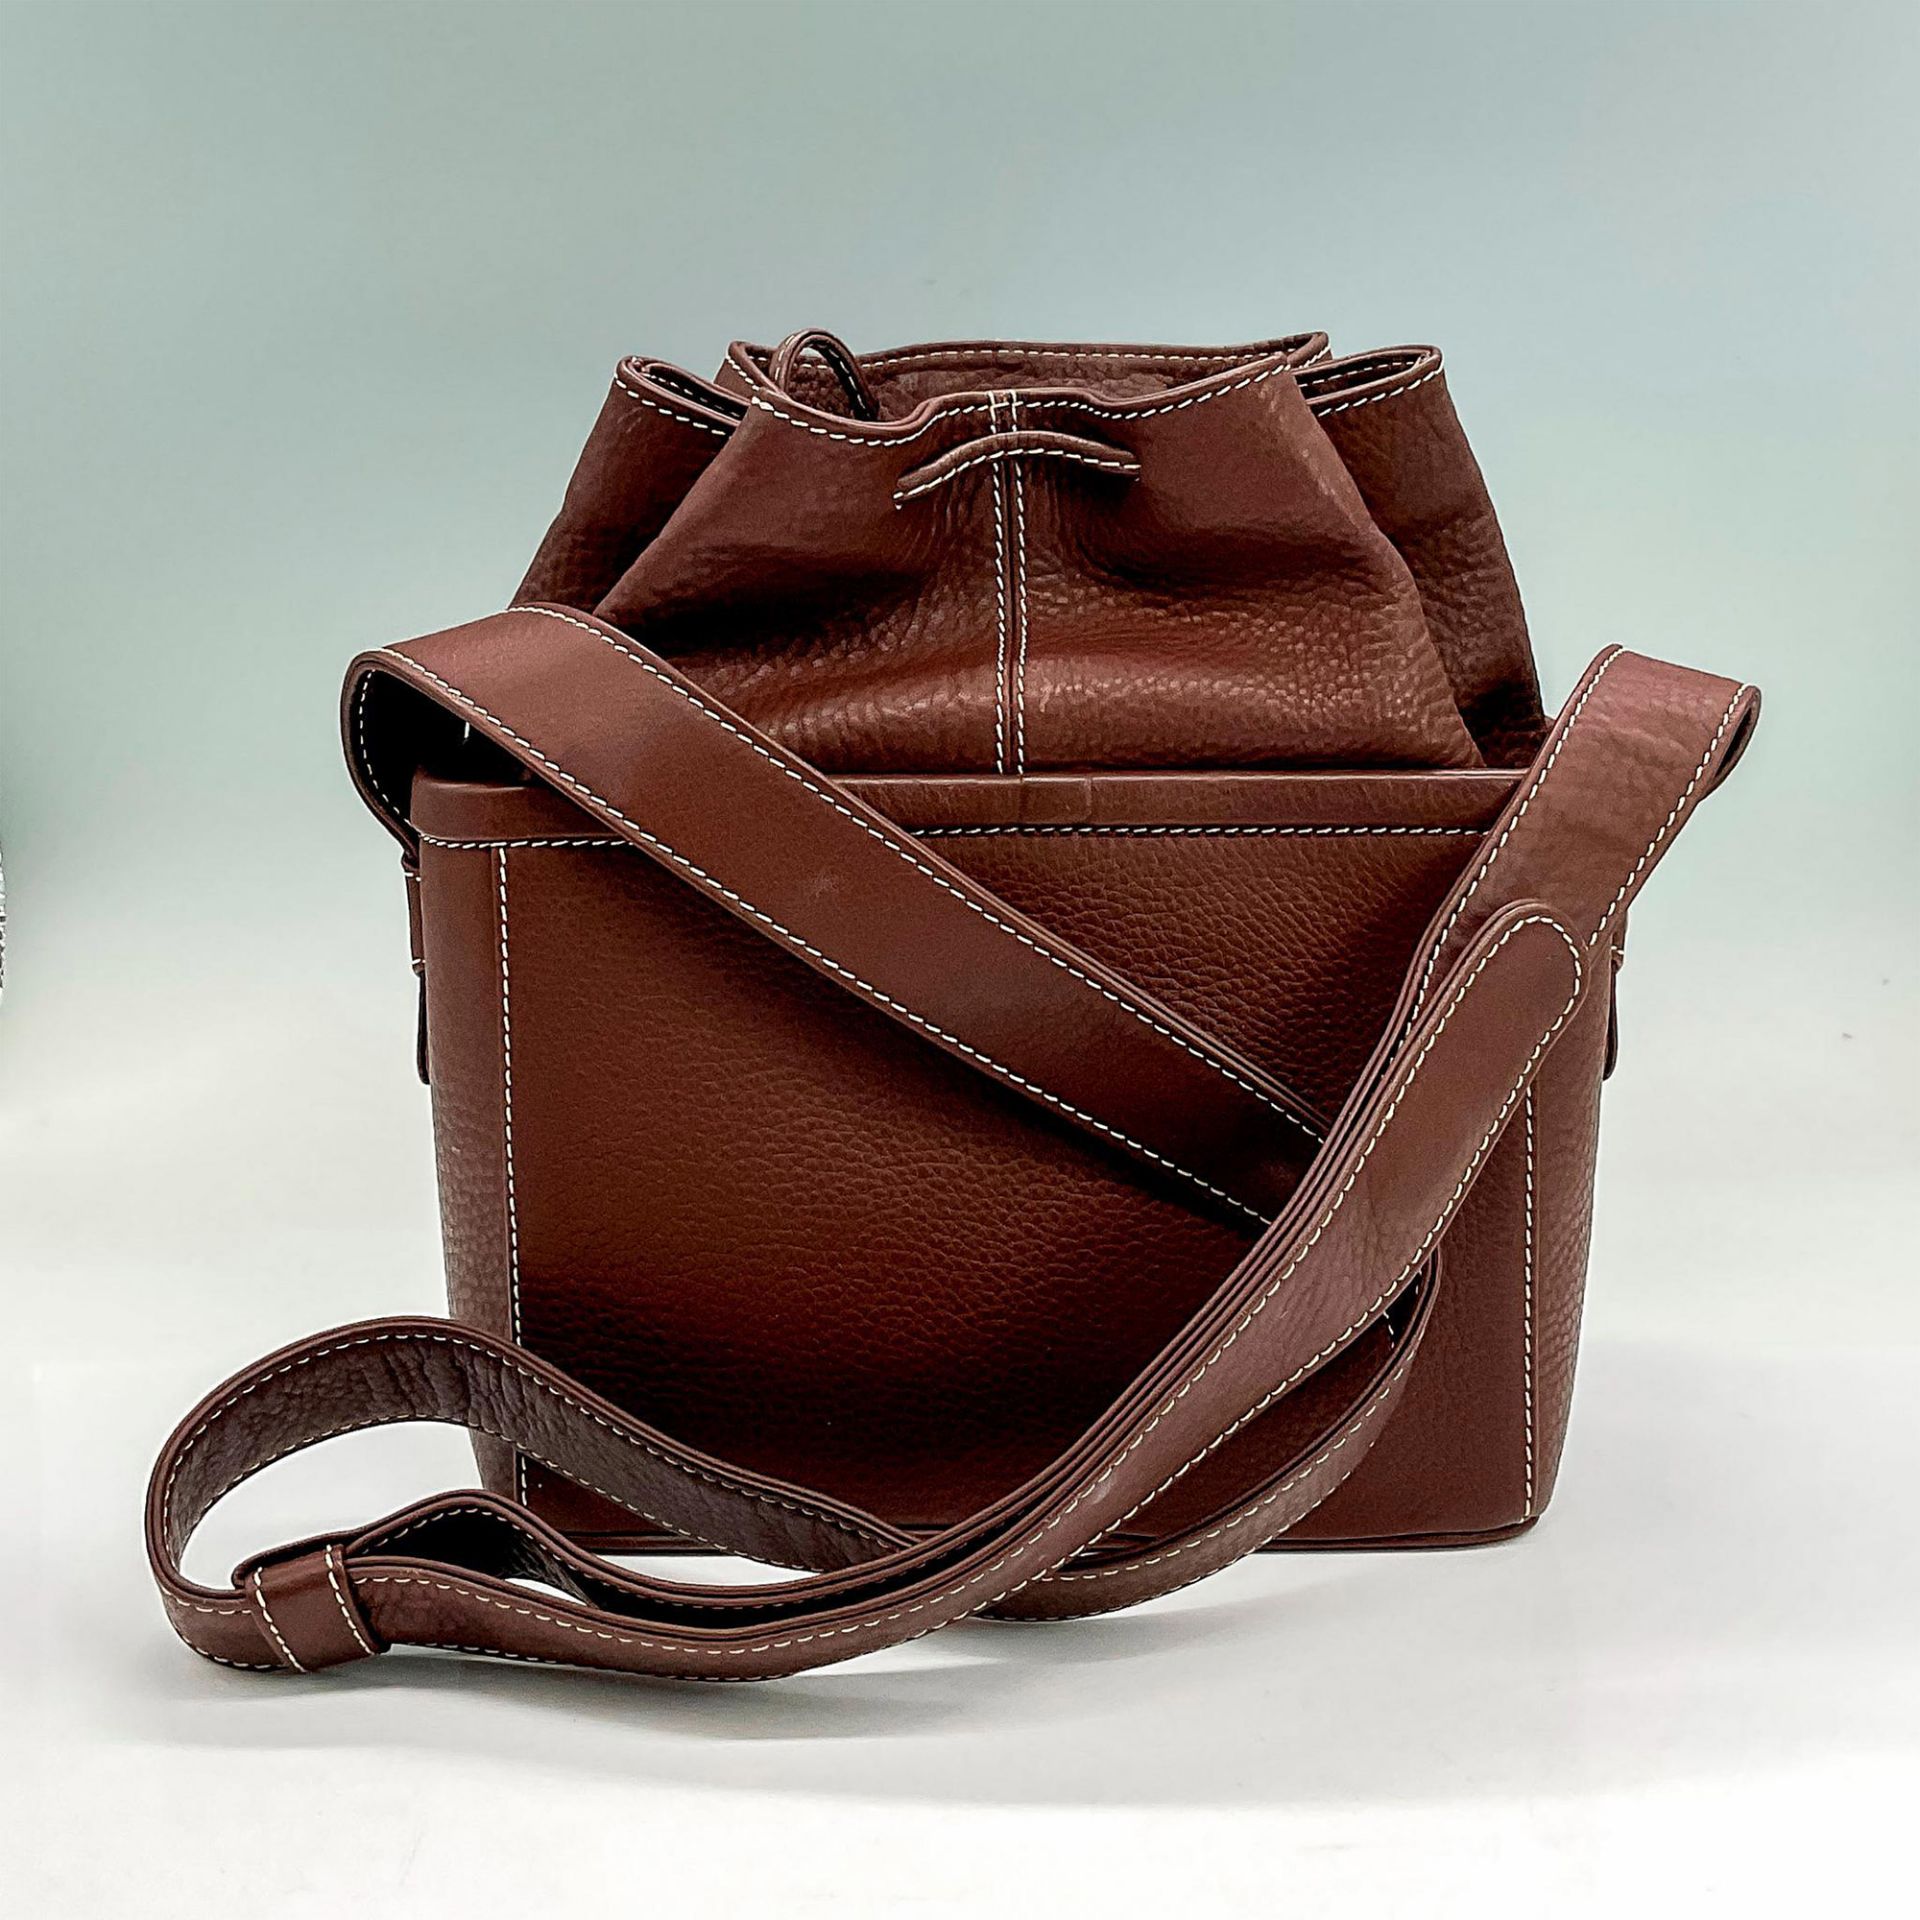 Lladro Brown Leather Handbag With Porcelain Accents - Image 3 of 6